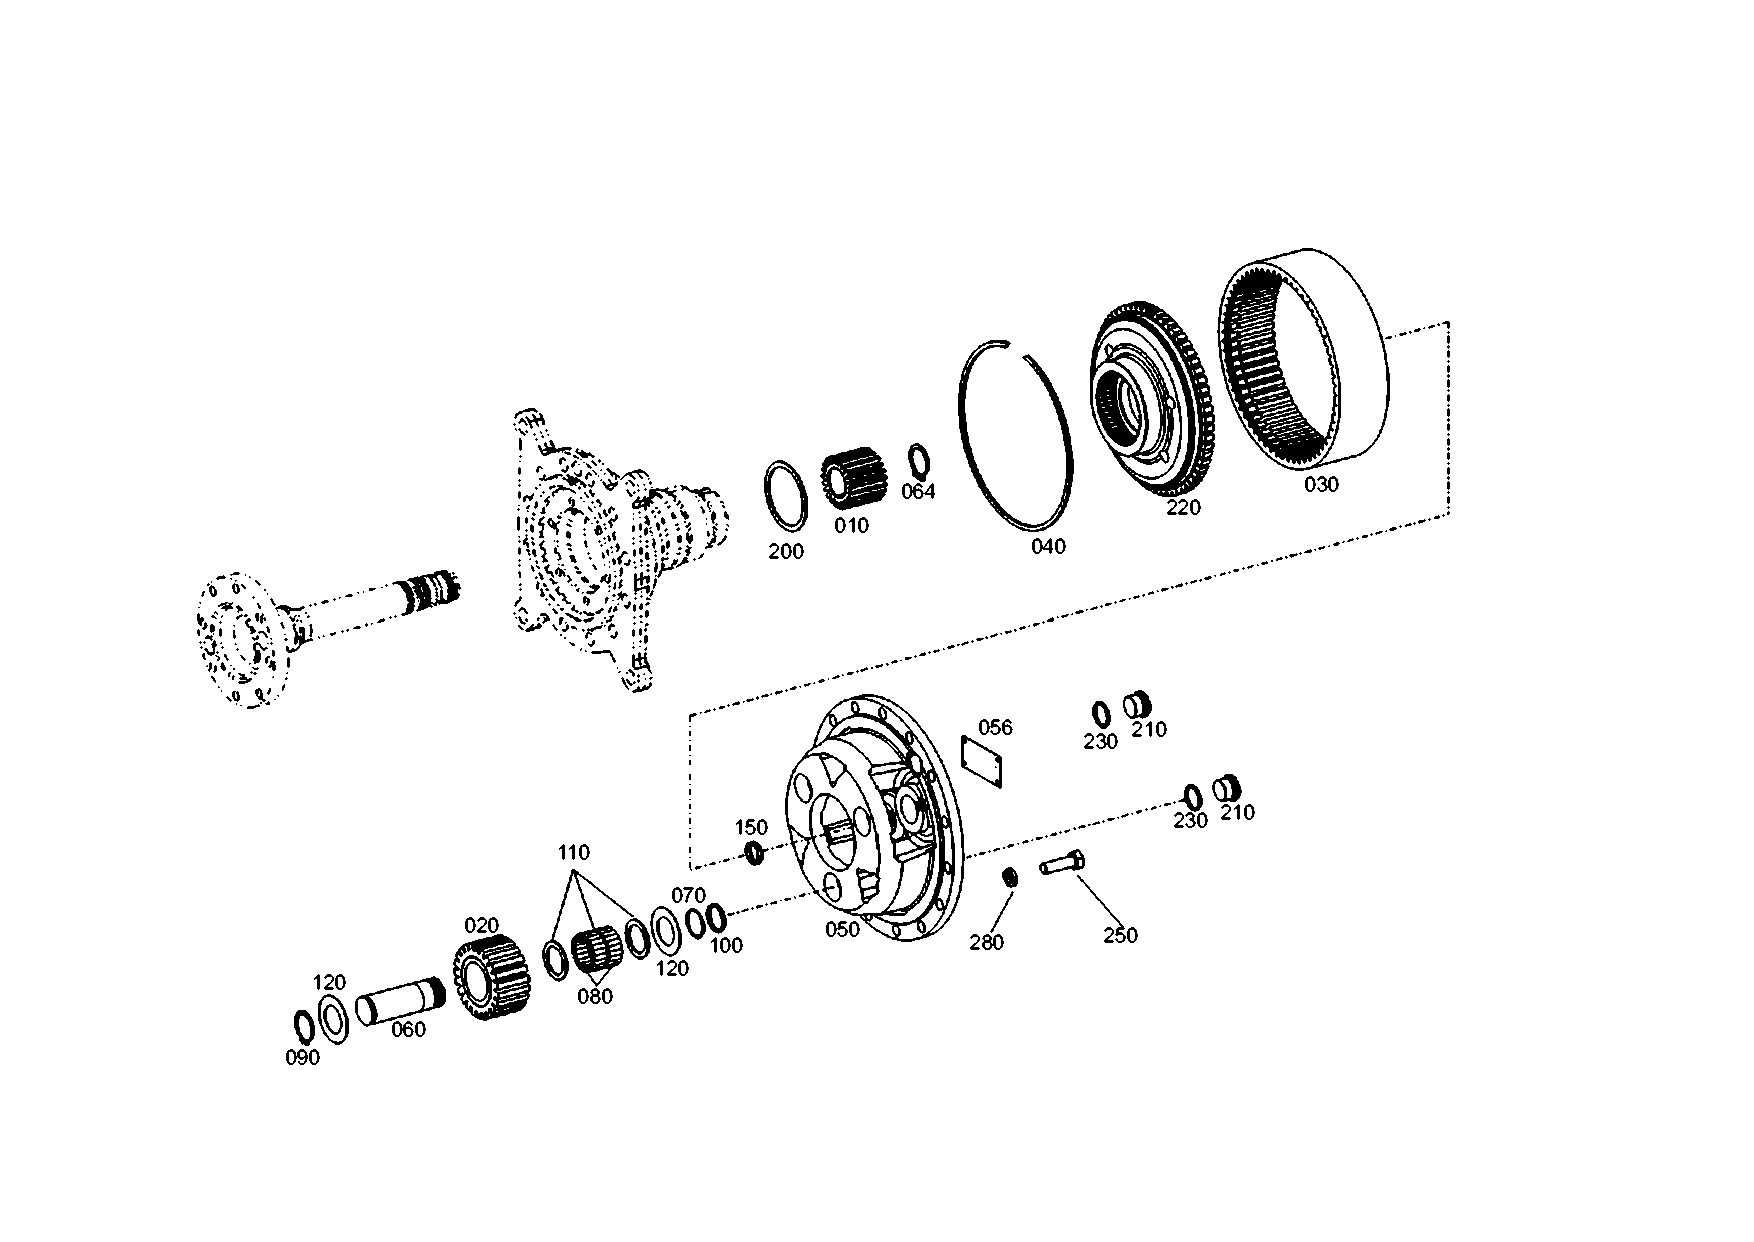 drawing for NISSAN MOTOR CO. 07902193-0 - WASHER (figure 1)